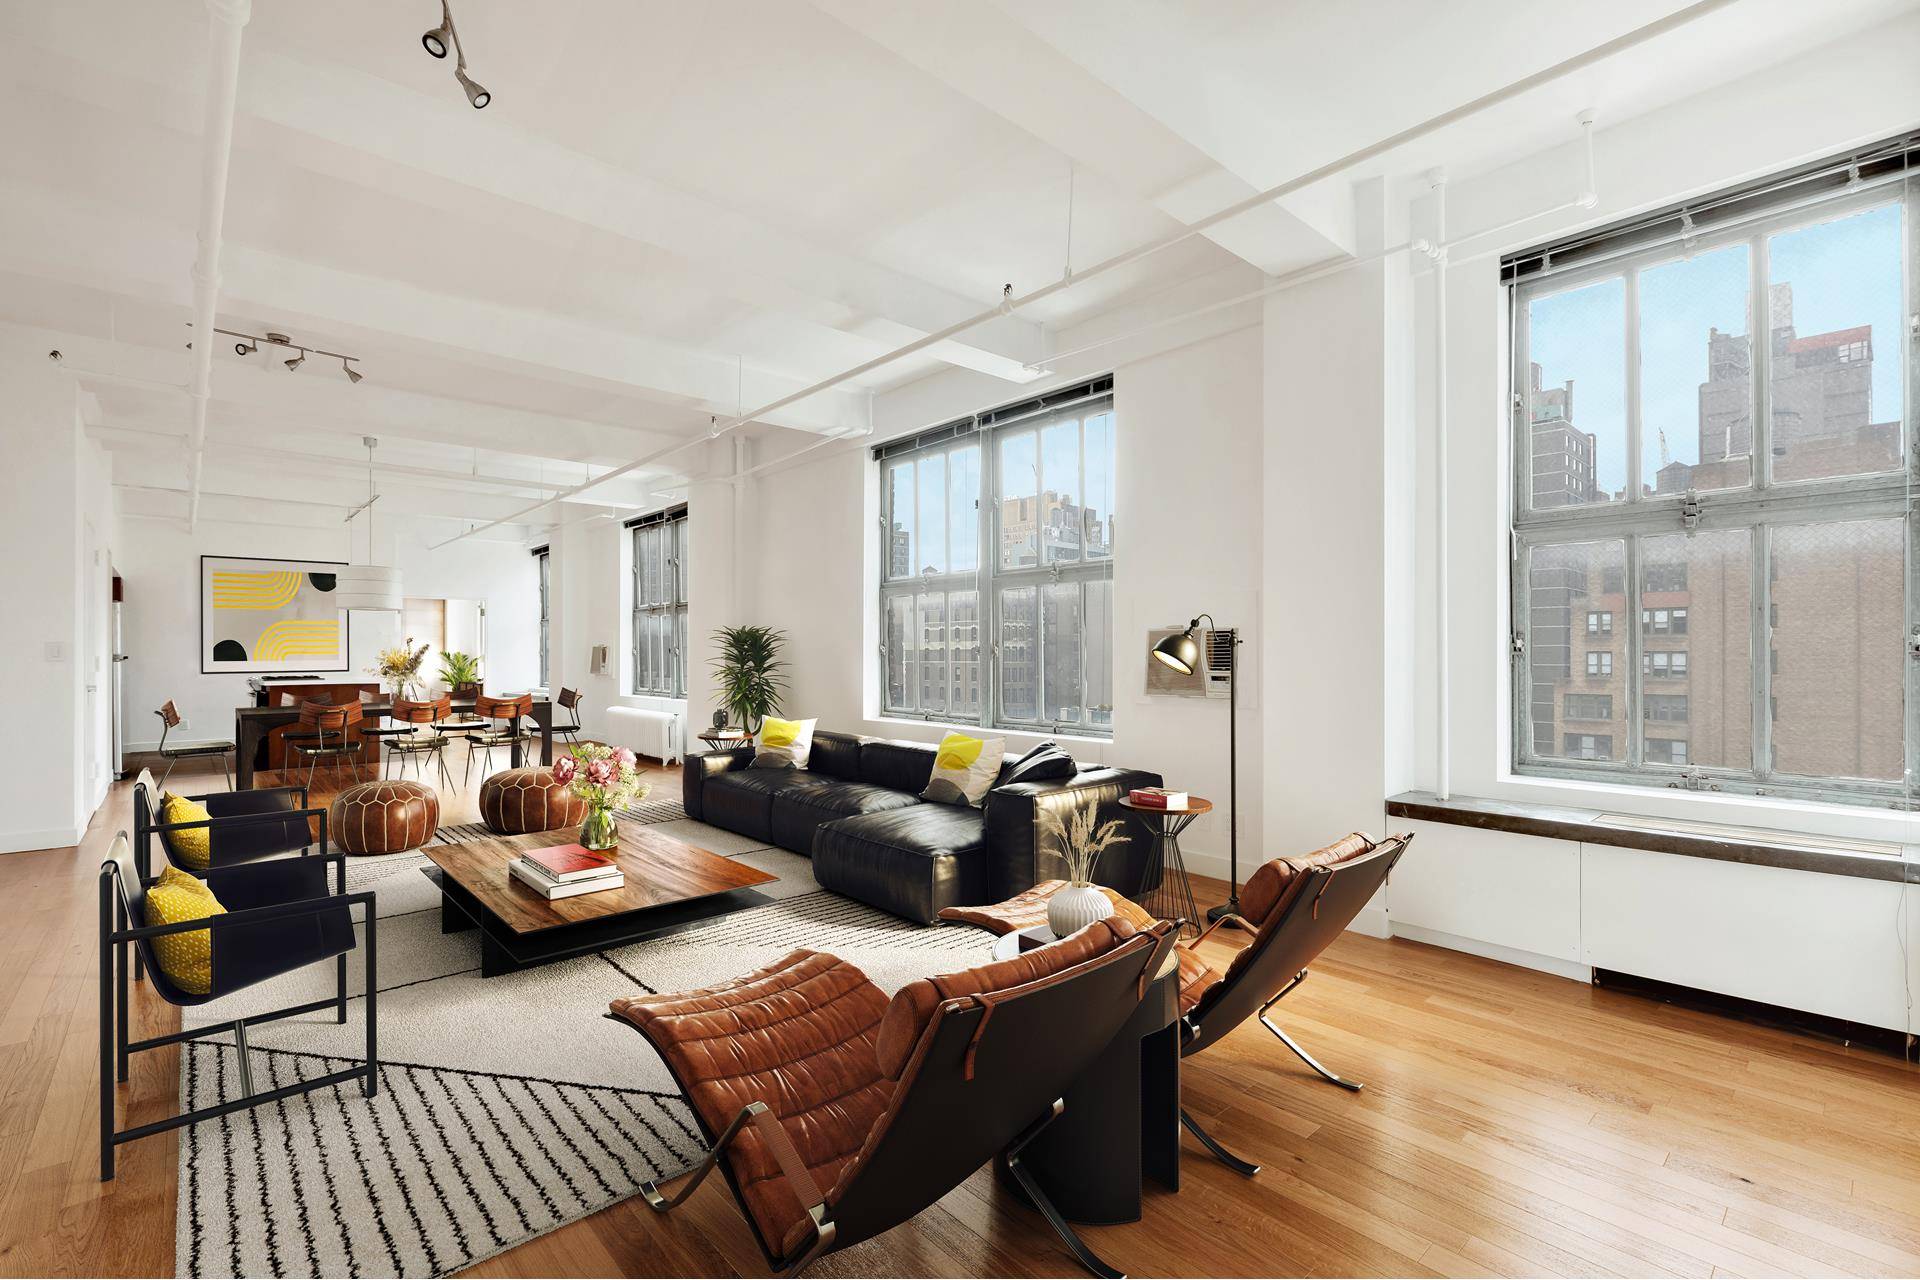 This airy 1, 875sf 3BR loft offers triple N S W exposures and soaring 10' 6 ?